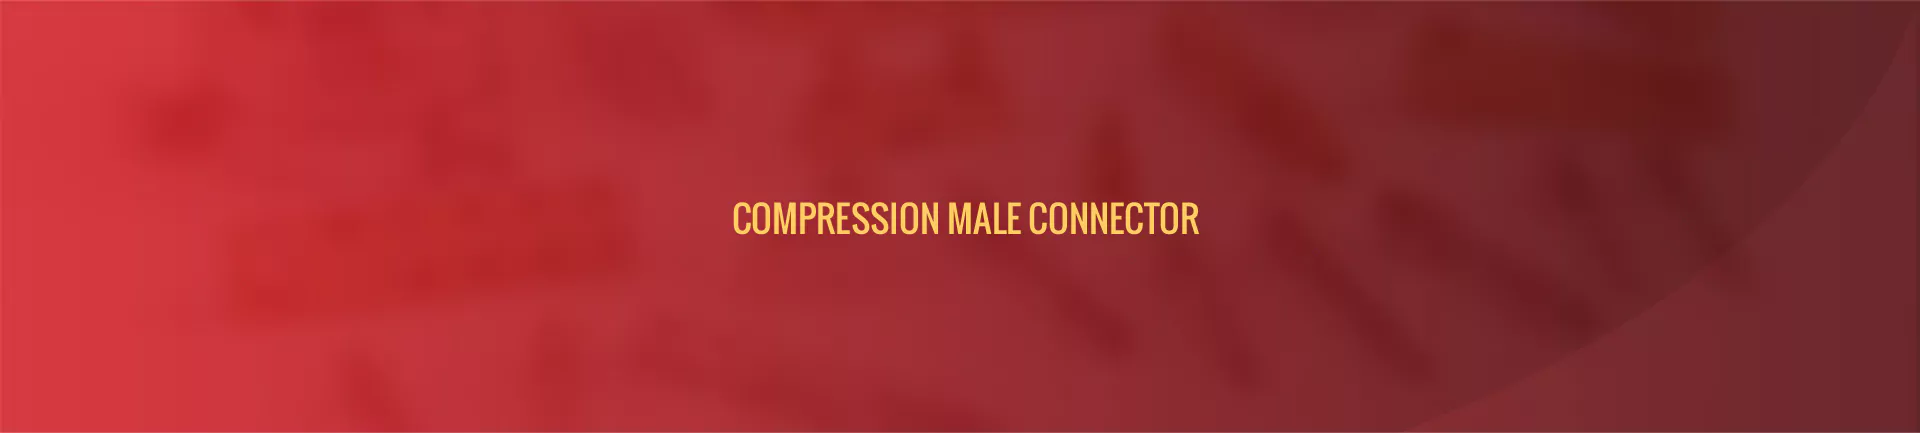 compression-male-connector-banner